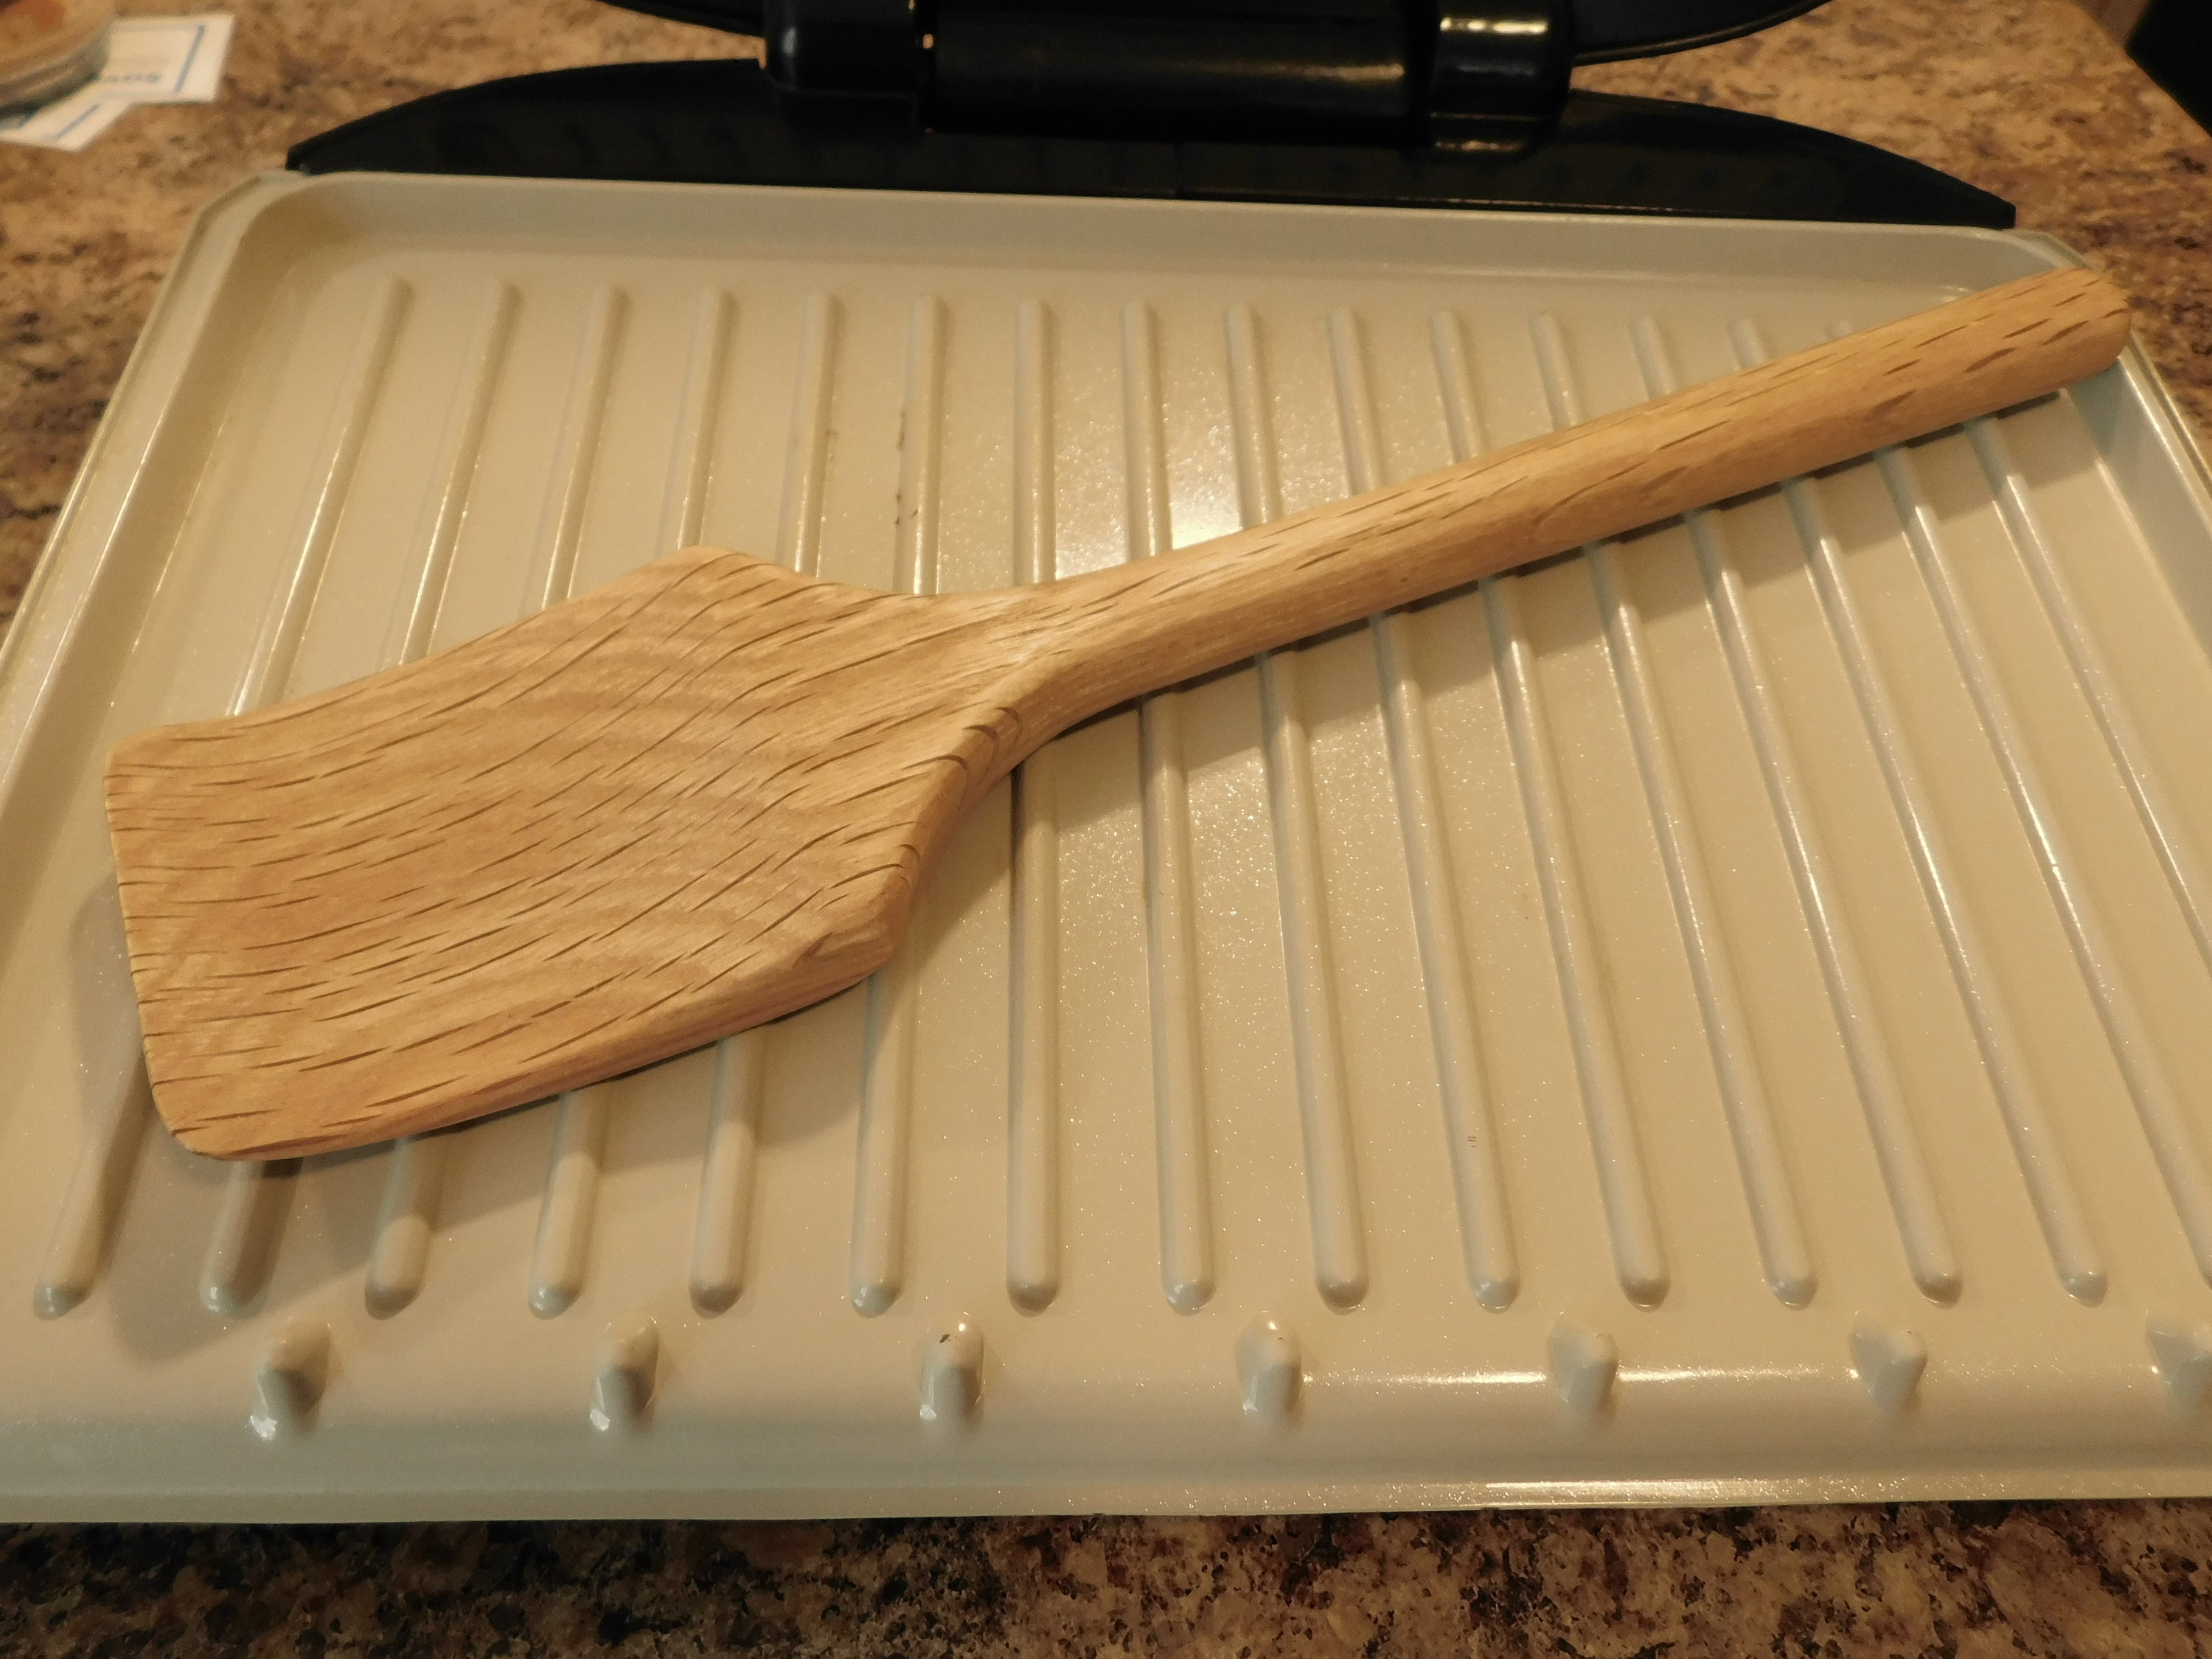 HAND CARVED SWEET GUM COOKING SPATULA – Ellei Home